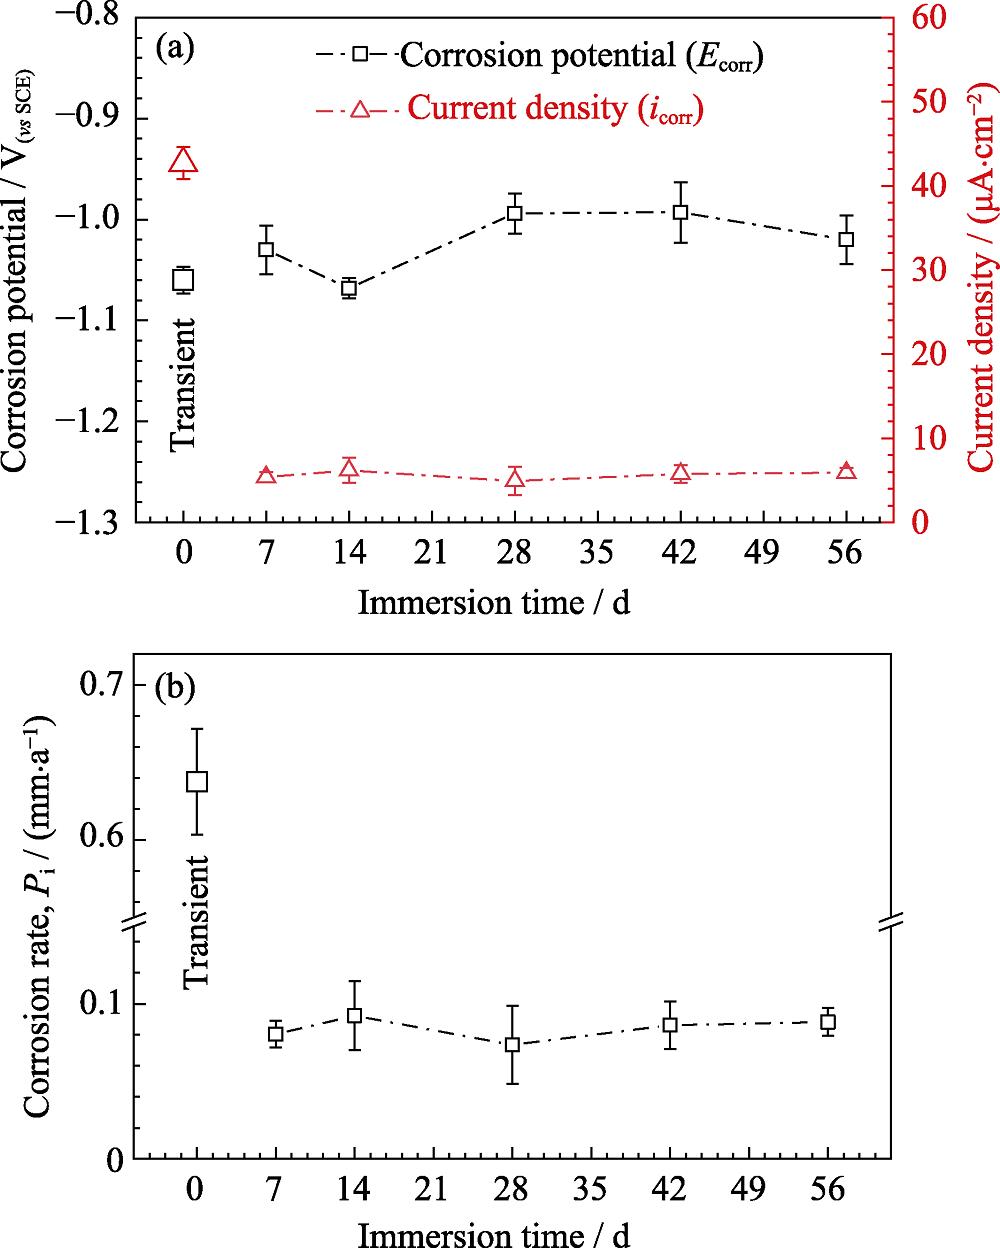 Parameters of corrosion potential and corrosion current density obtained from PDP curves (a), and corrosion rate Pi obtained from current density (b)